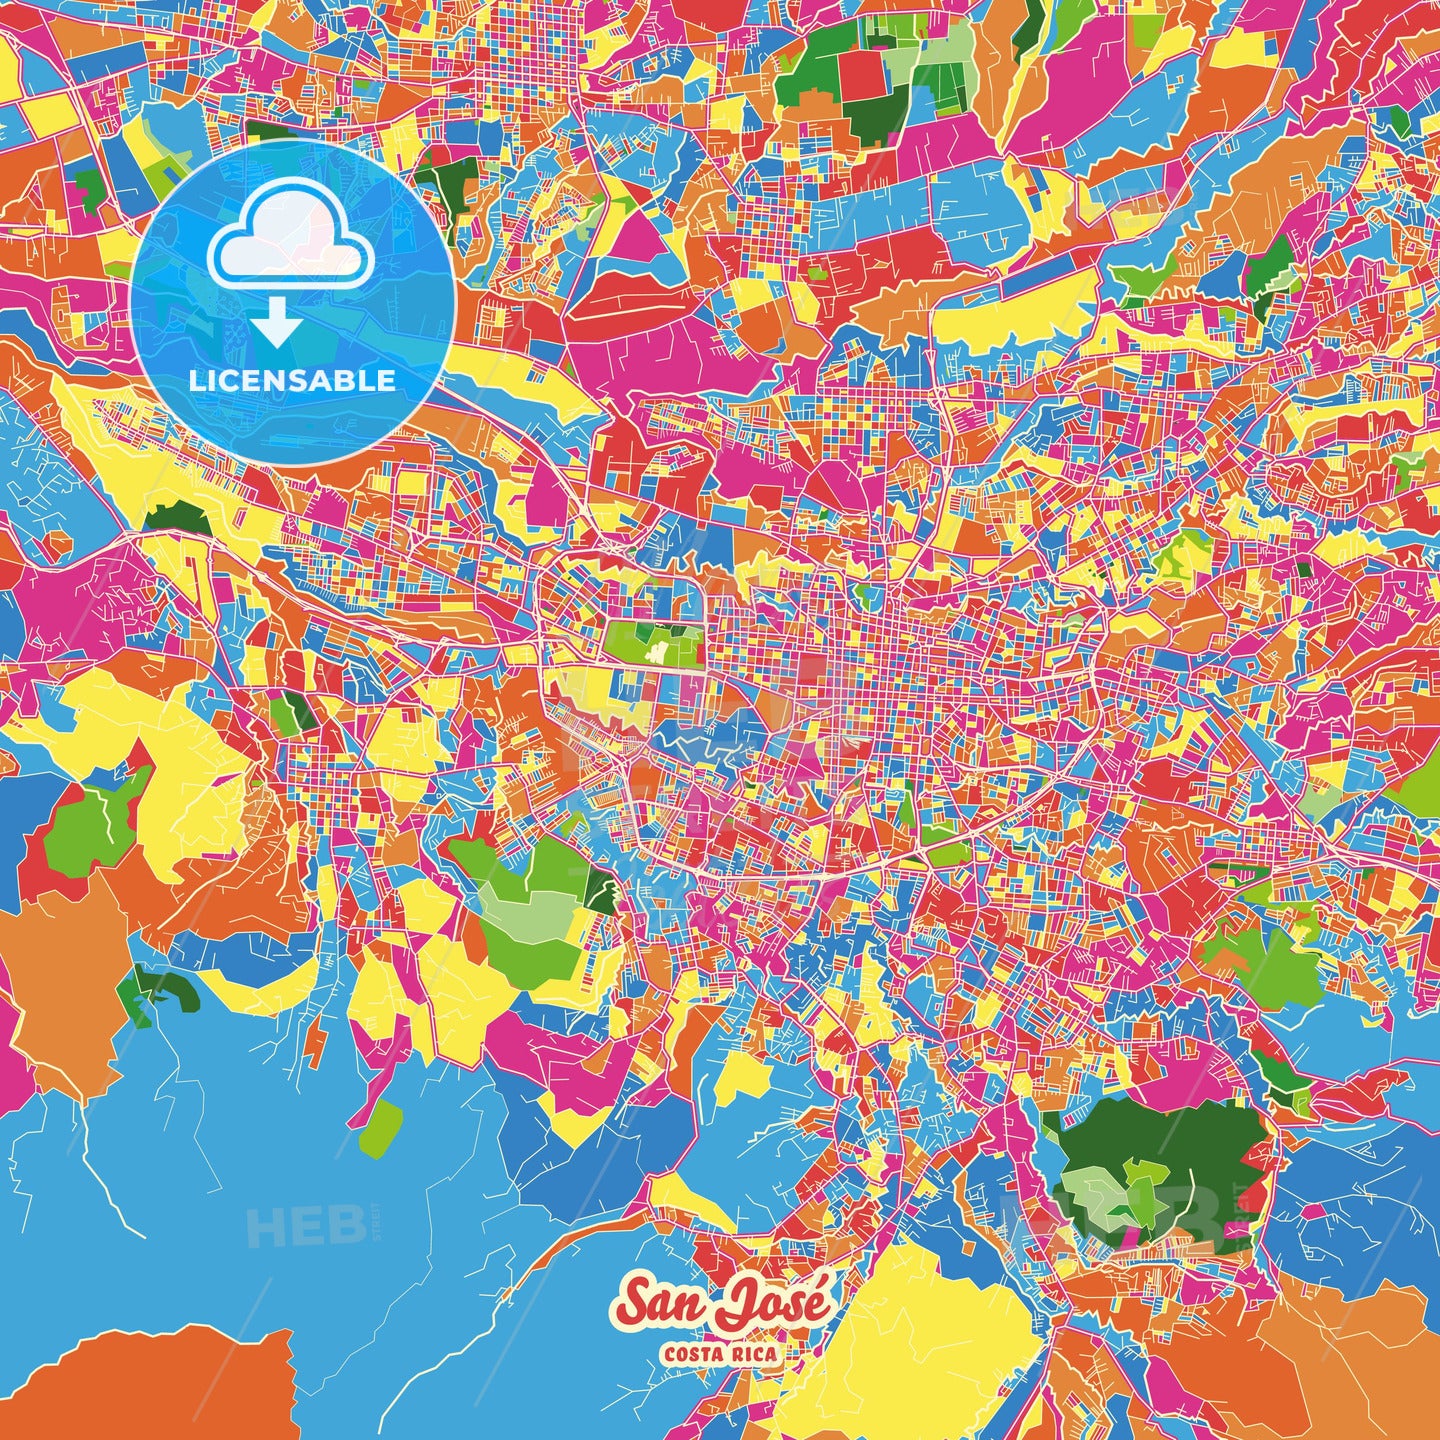 San José, Costa Rica Crazy Colorful Street Map Poster Template - HEBSTREITS Sketches